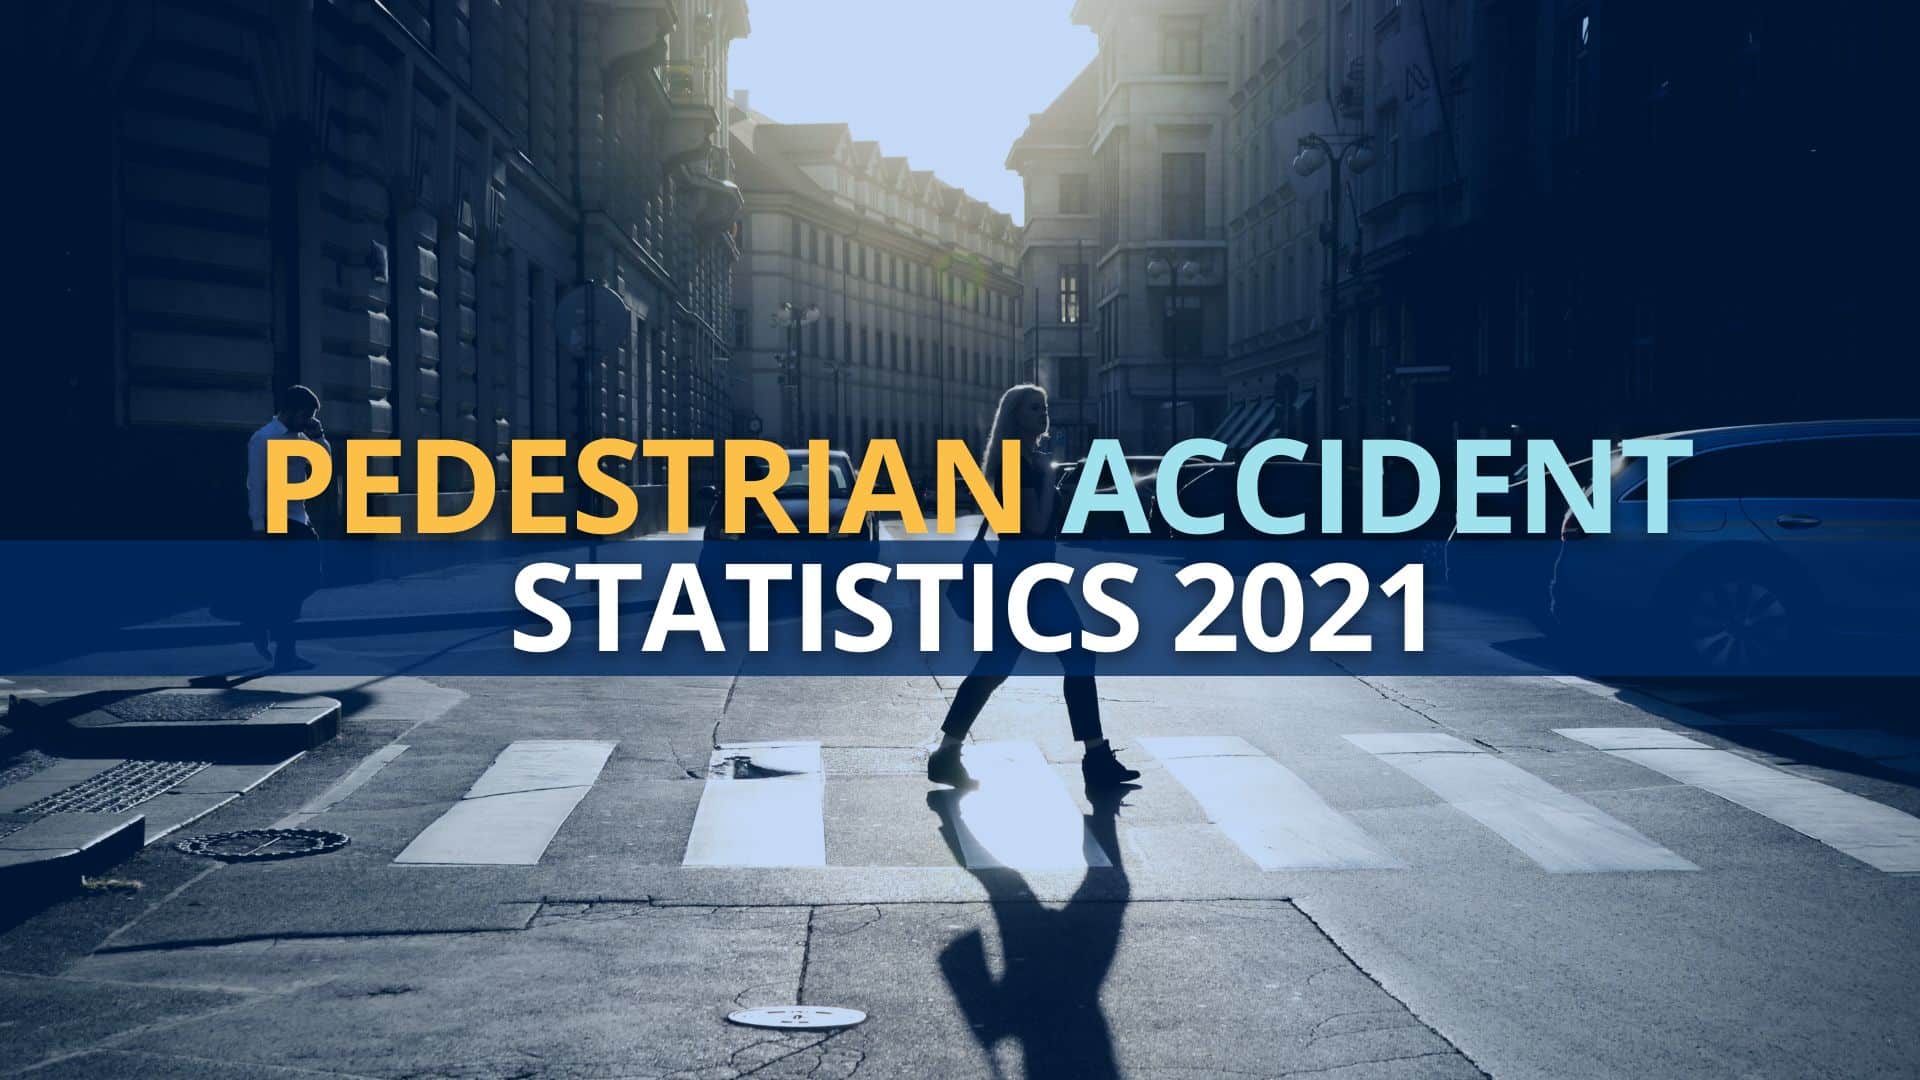 Michigan Pedestrian Accident Statistics 2021: Here's What To Know